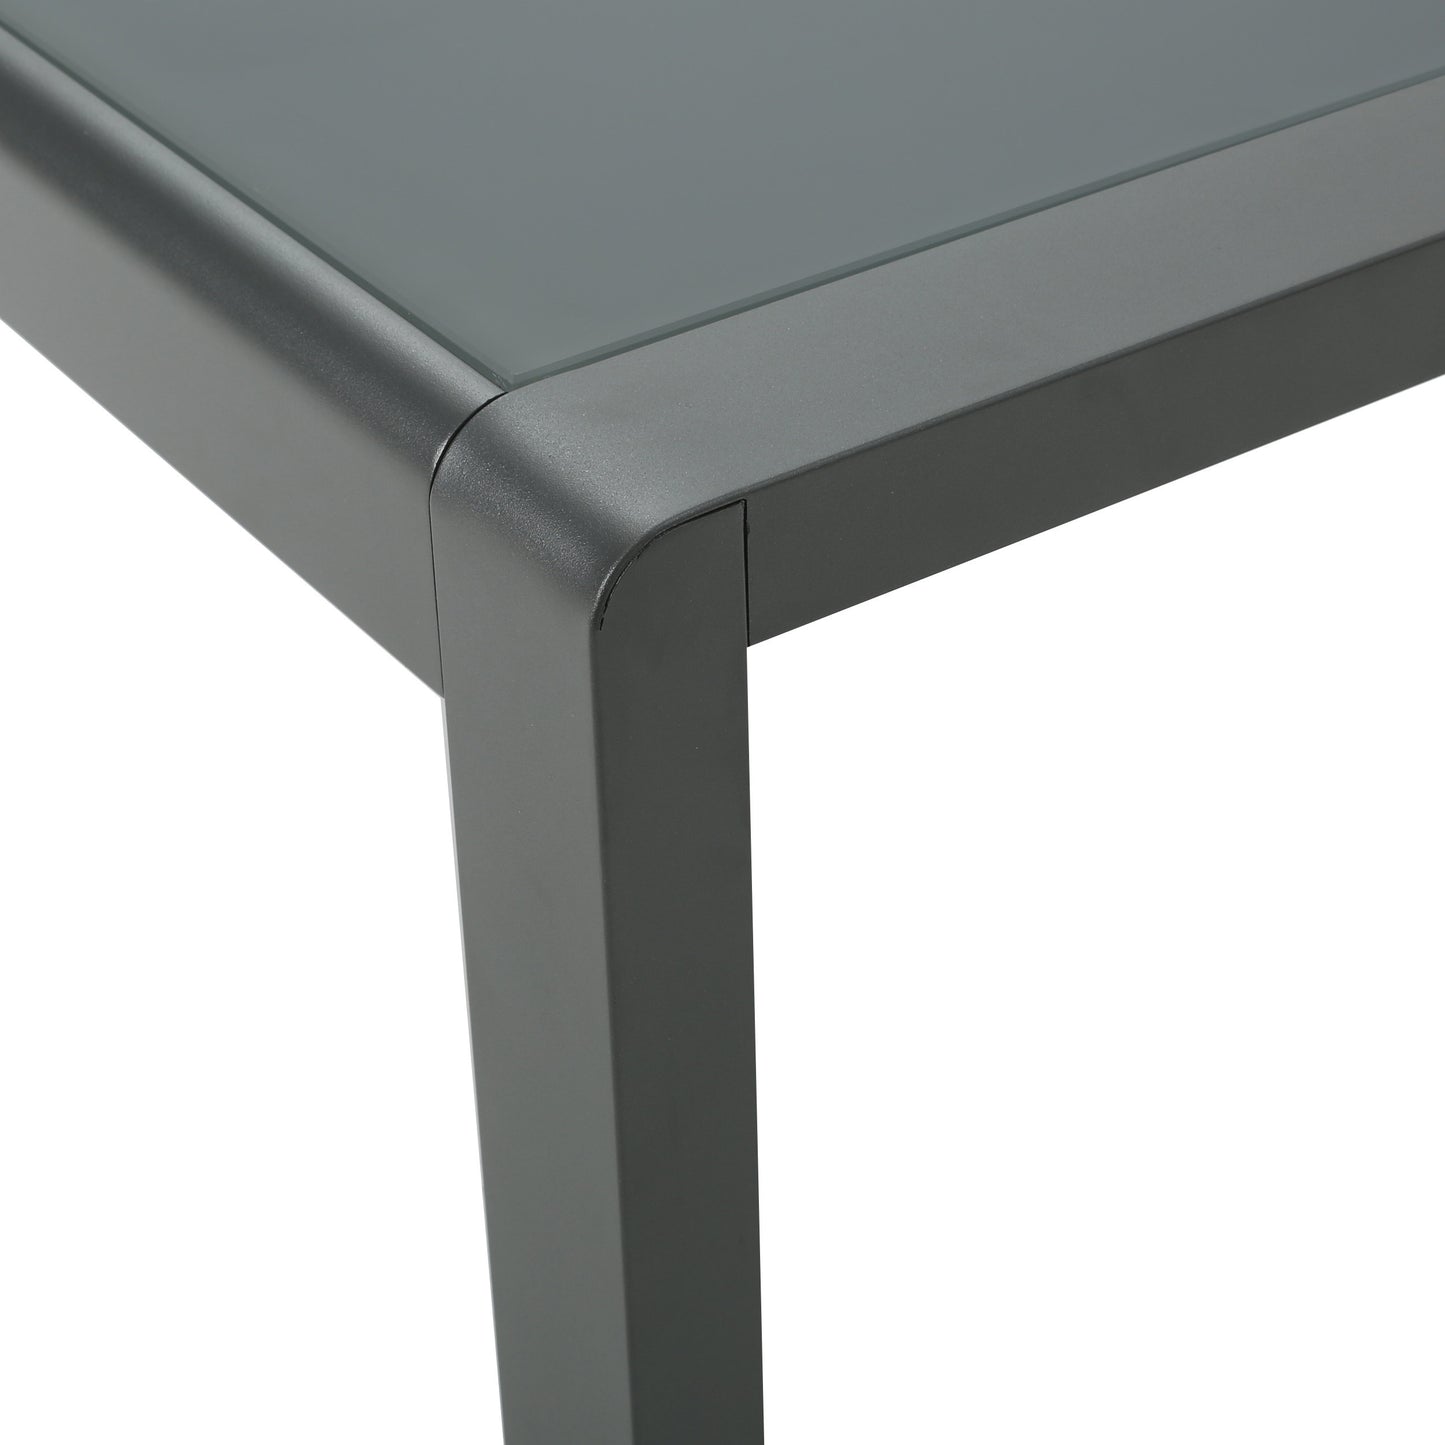 Crested Bay Outdoor Gray Aluminum Coffee Table with Tempered Glass Table Top